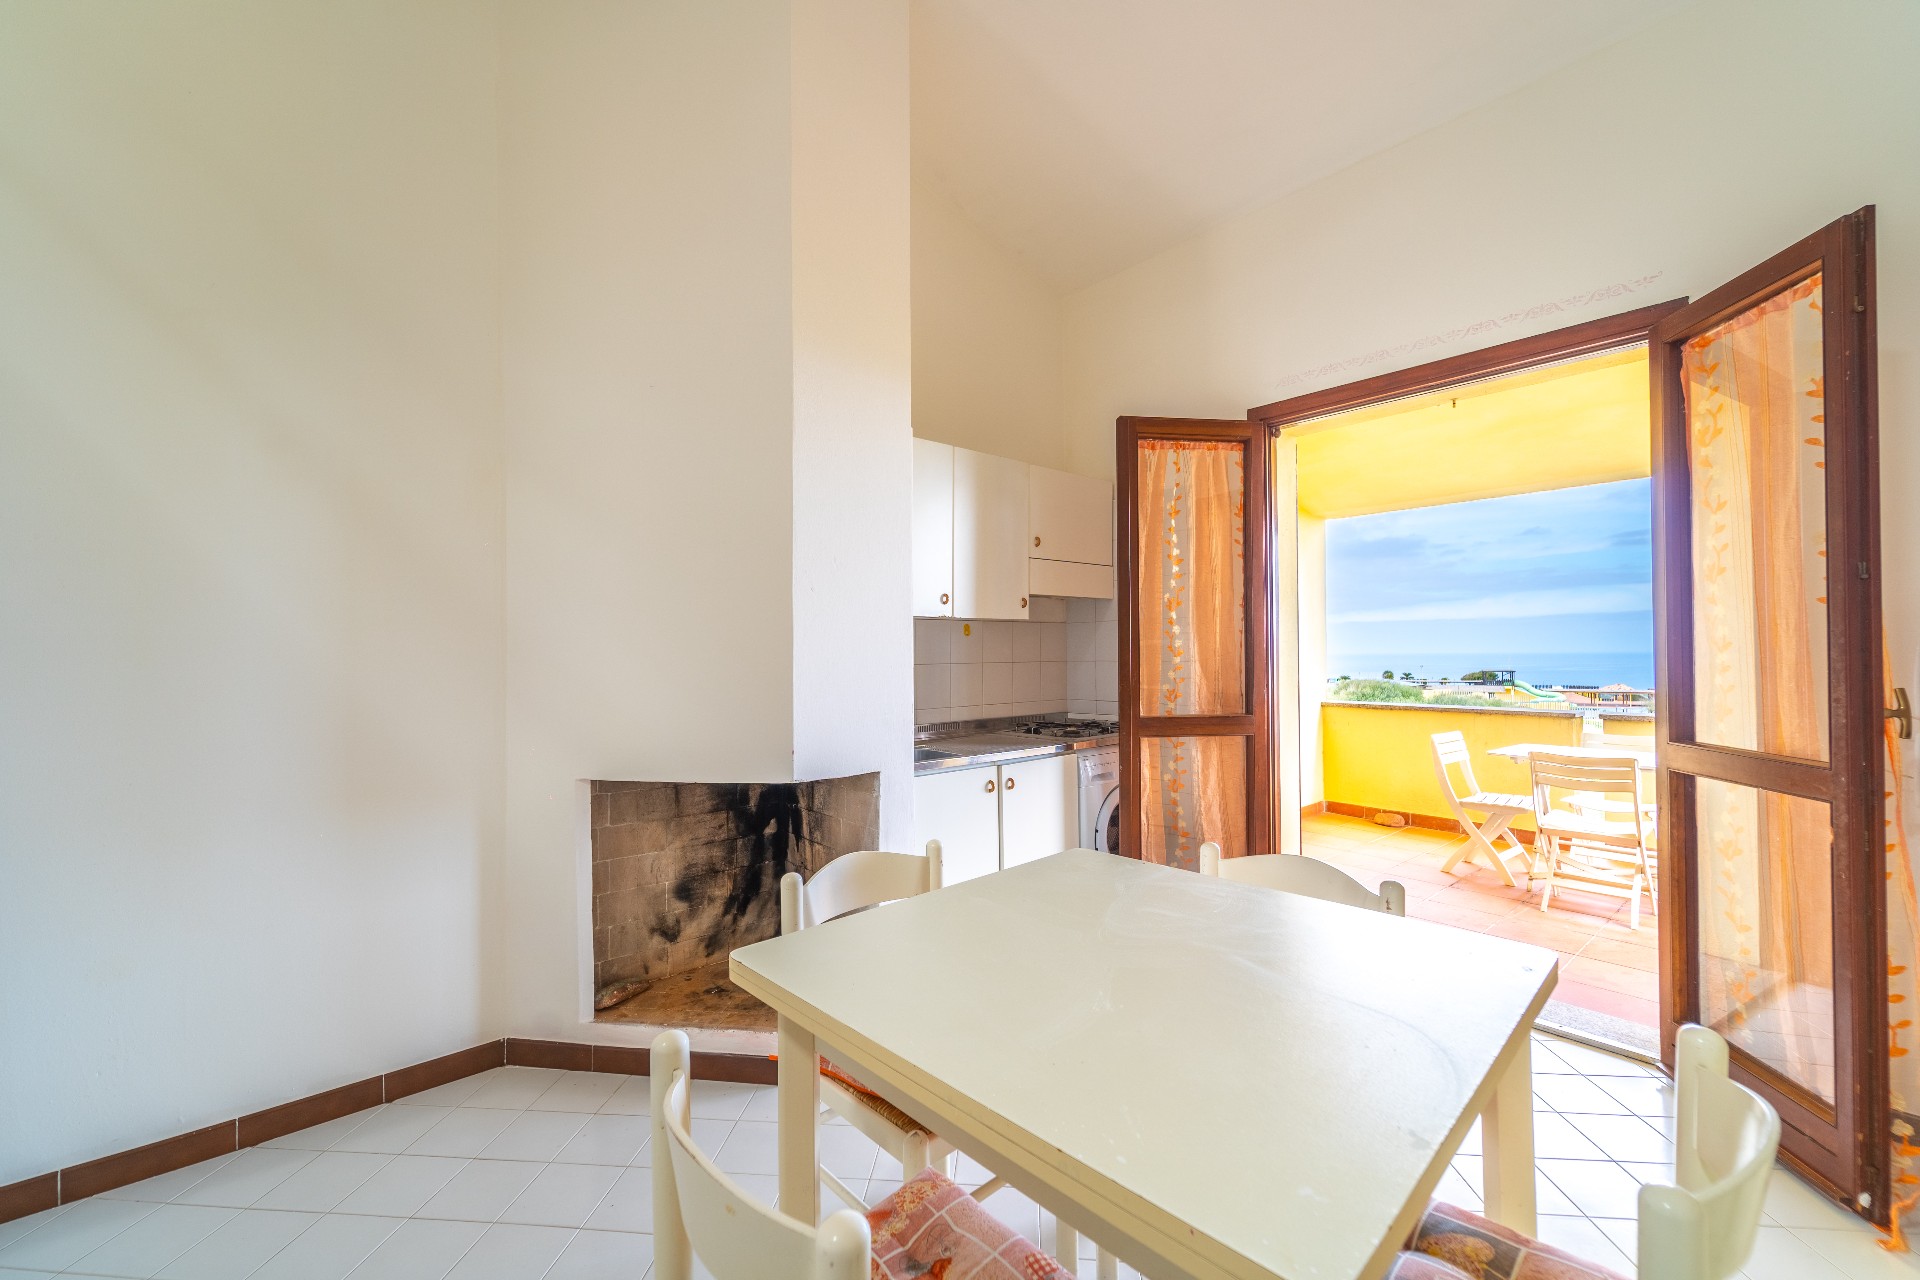 Flat with sea view terrace in Isola Rossa